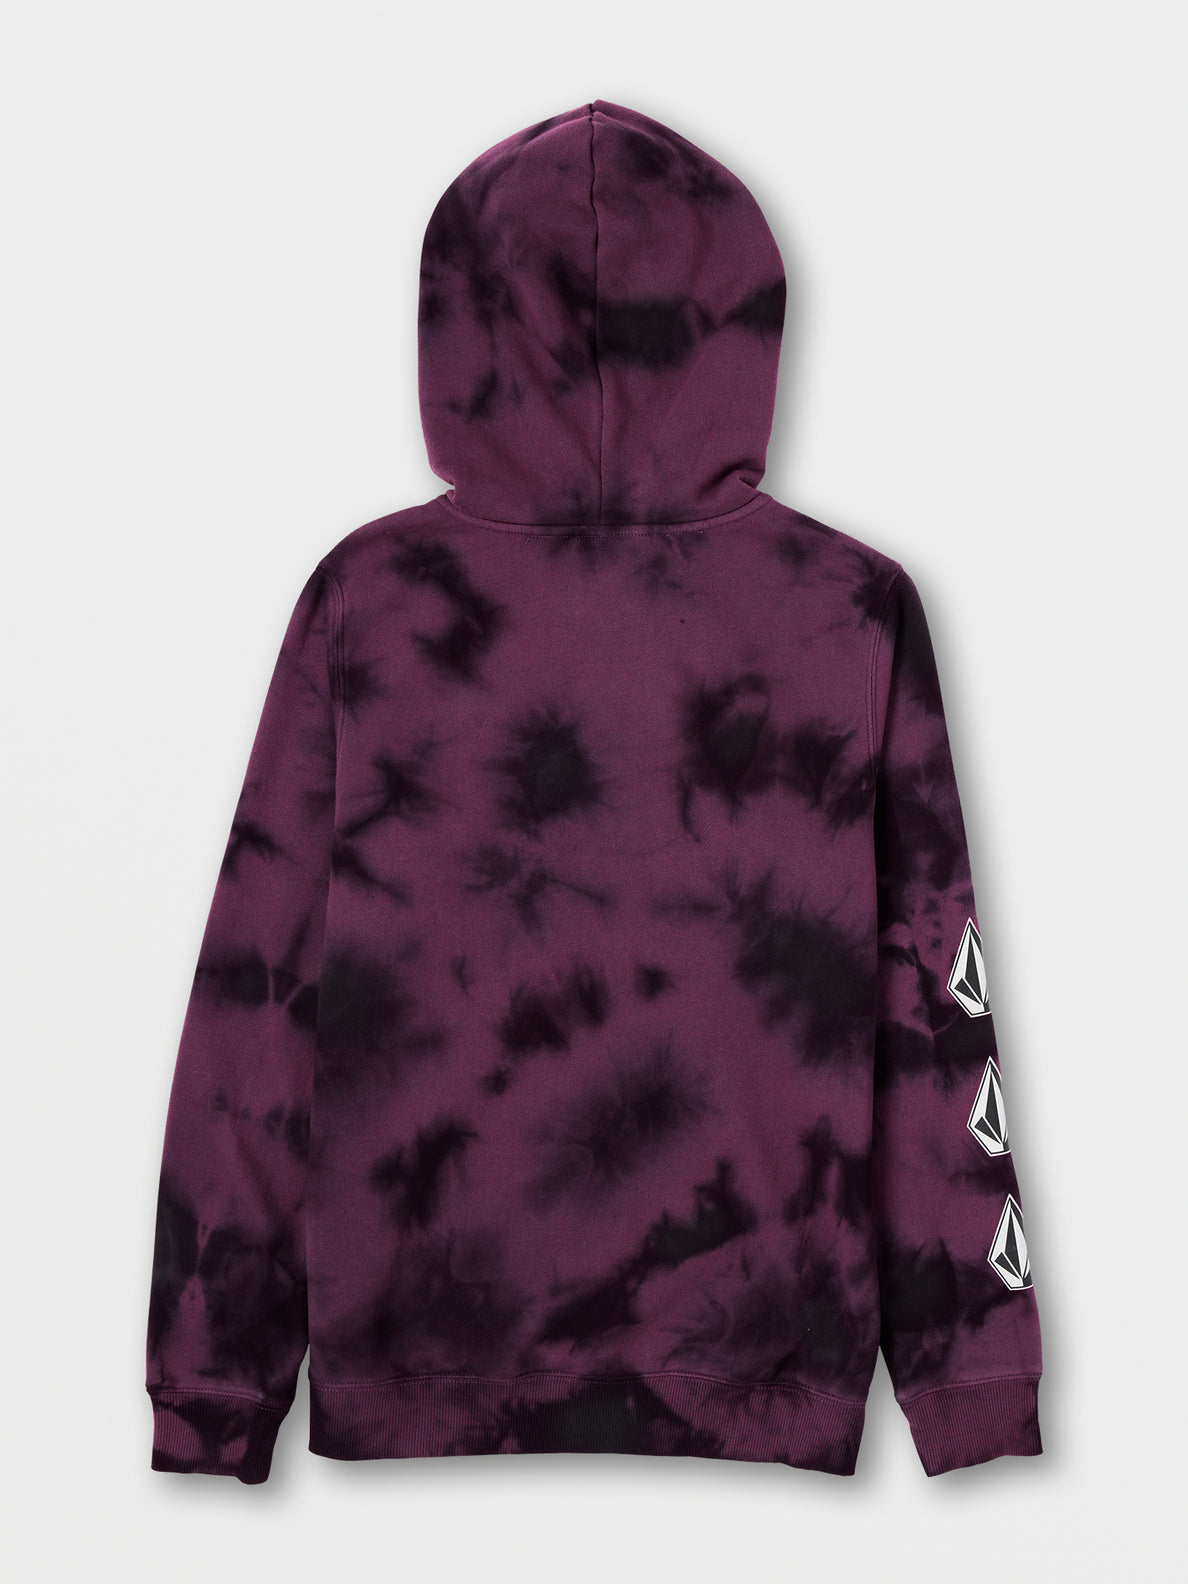 Big Boys Iconic Stone Plus Pullover Hoodie - Mulberry (C4132201_MUL) [B]